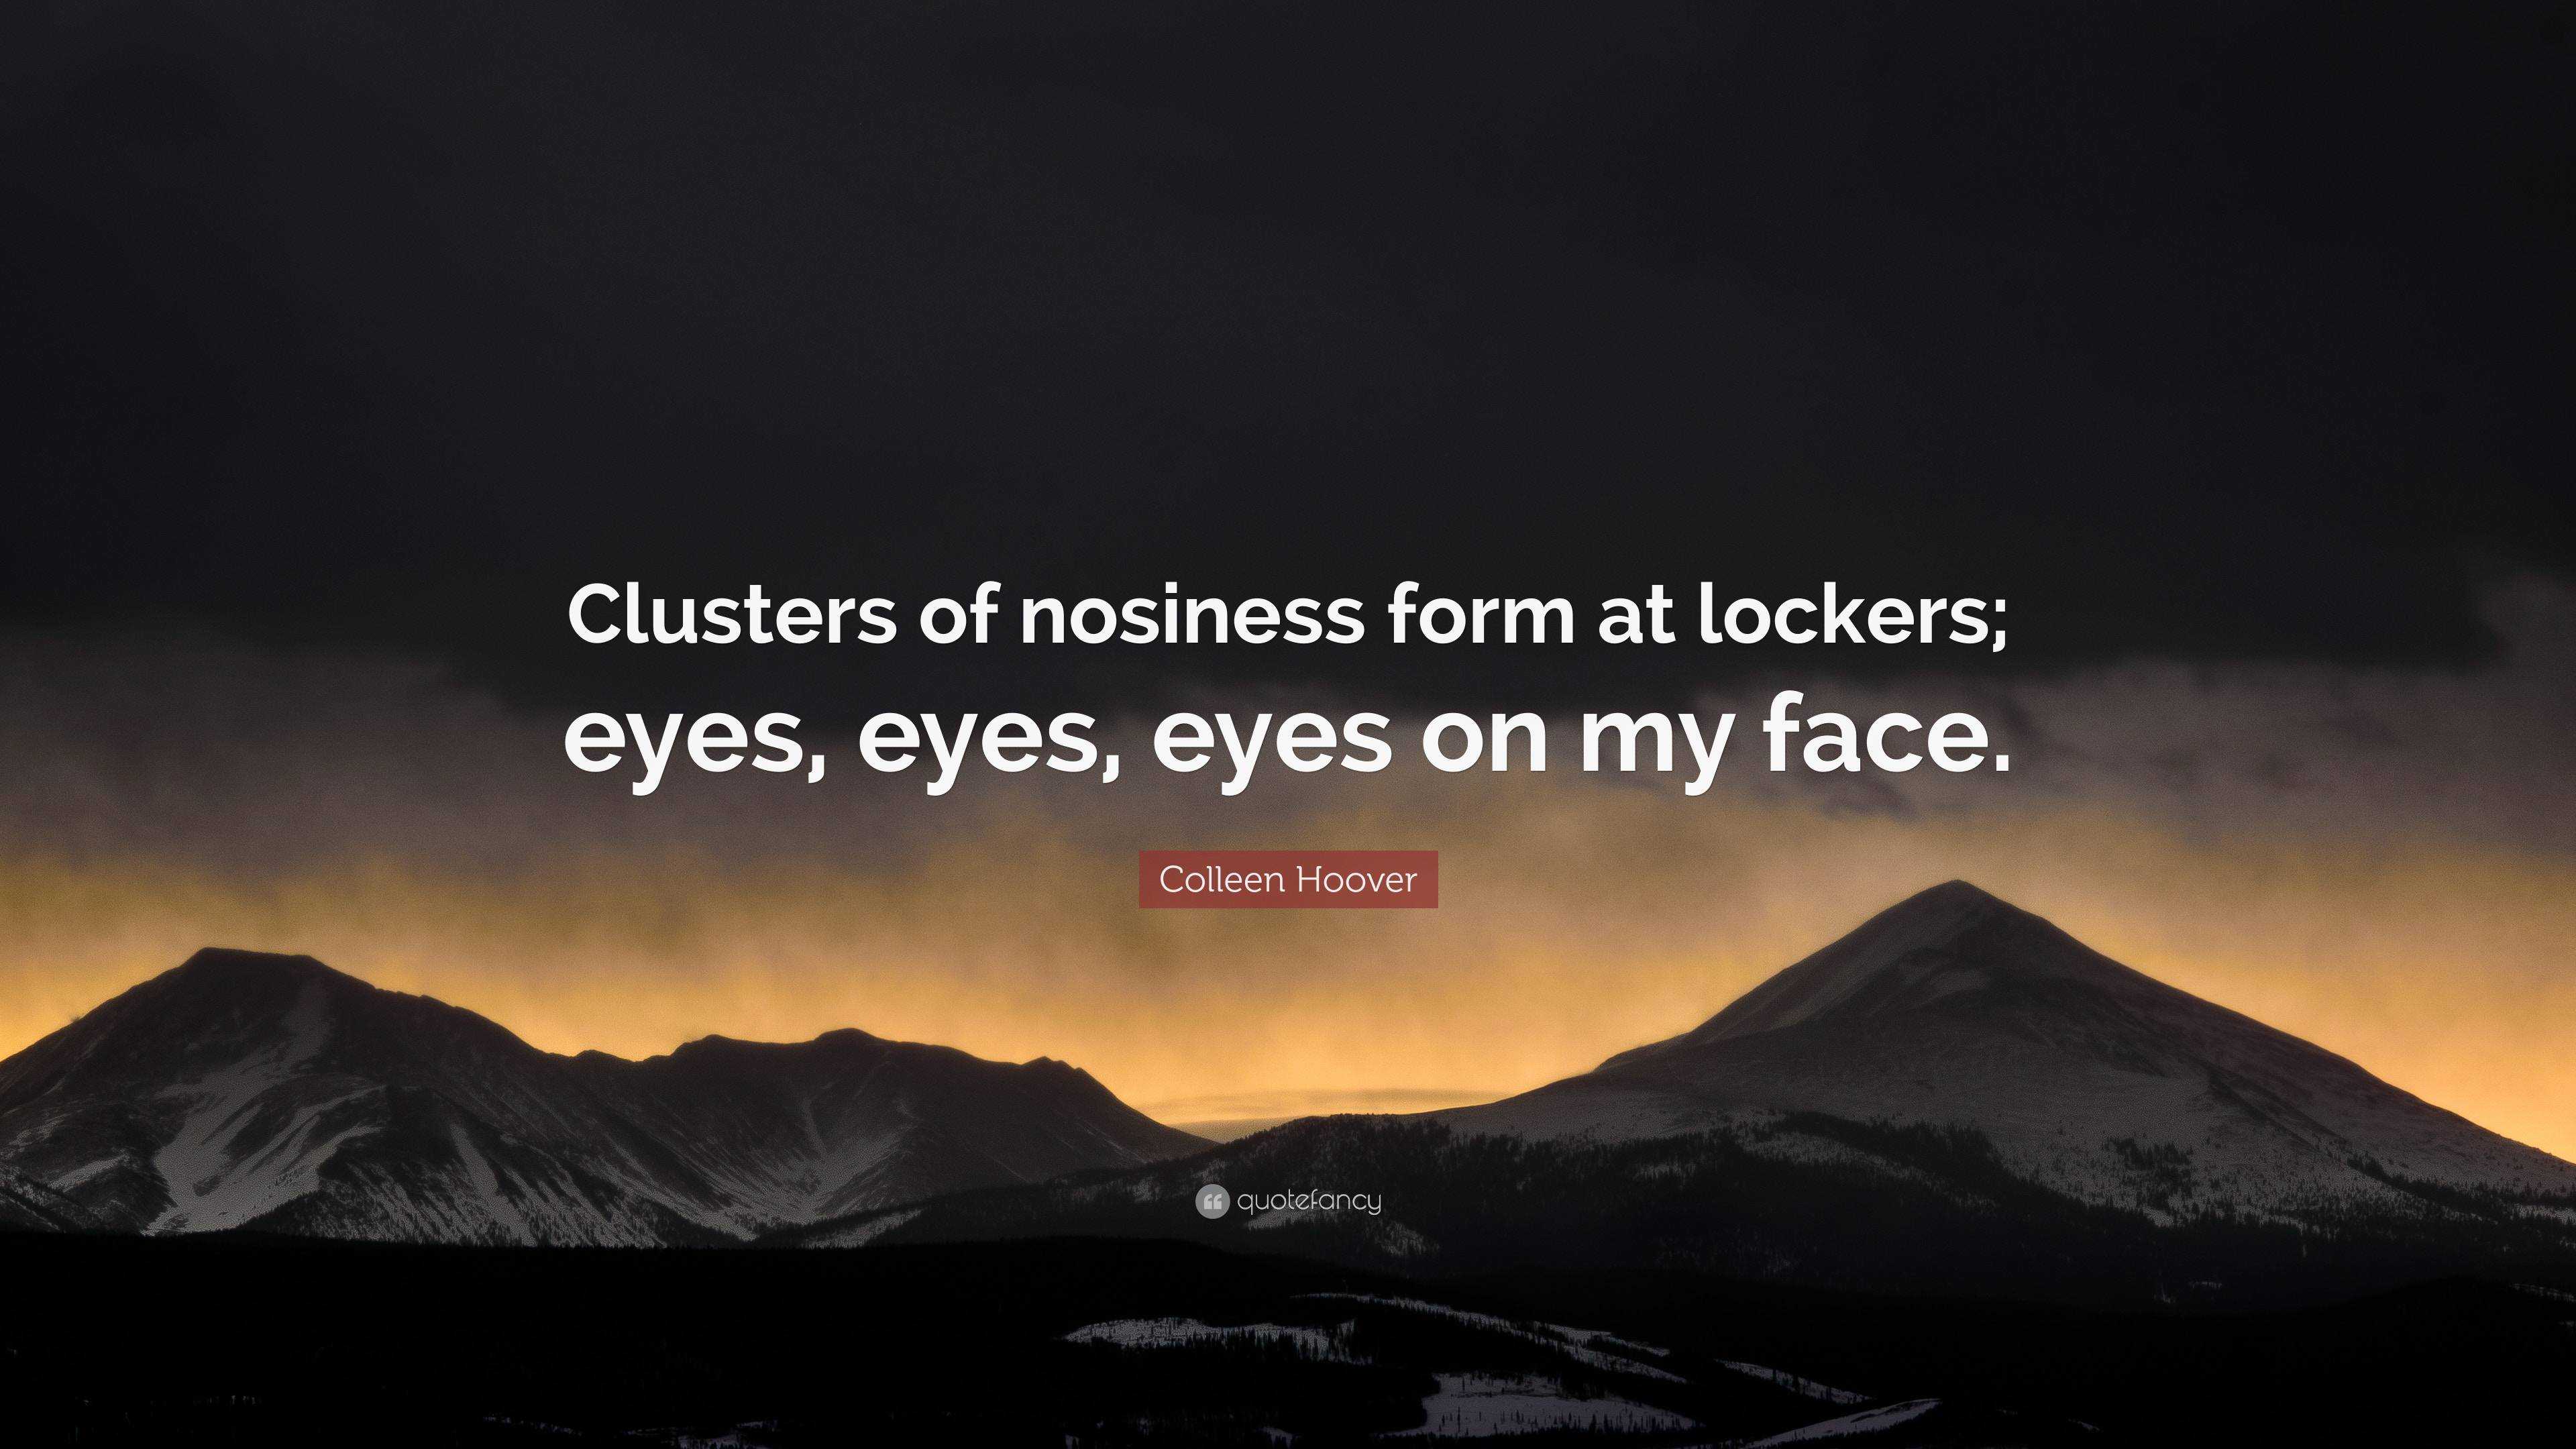 Colleen Hoover Quote Clusters Of Nosiness Form At Lockers Eyes Eyes Eyes On My Face